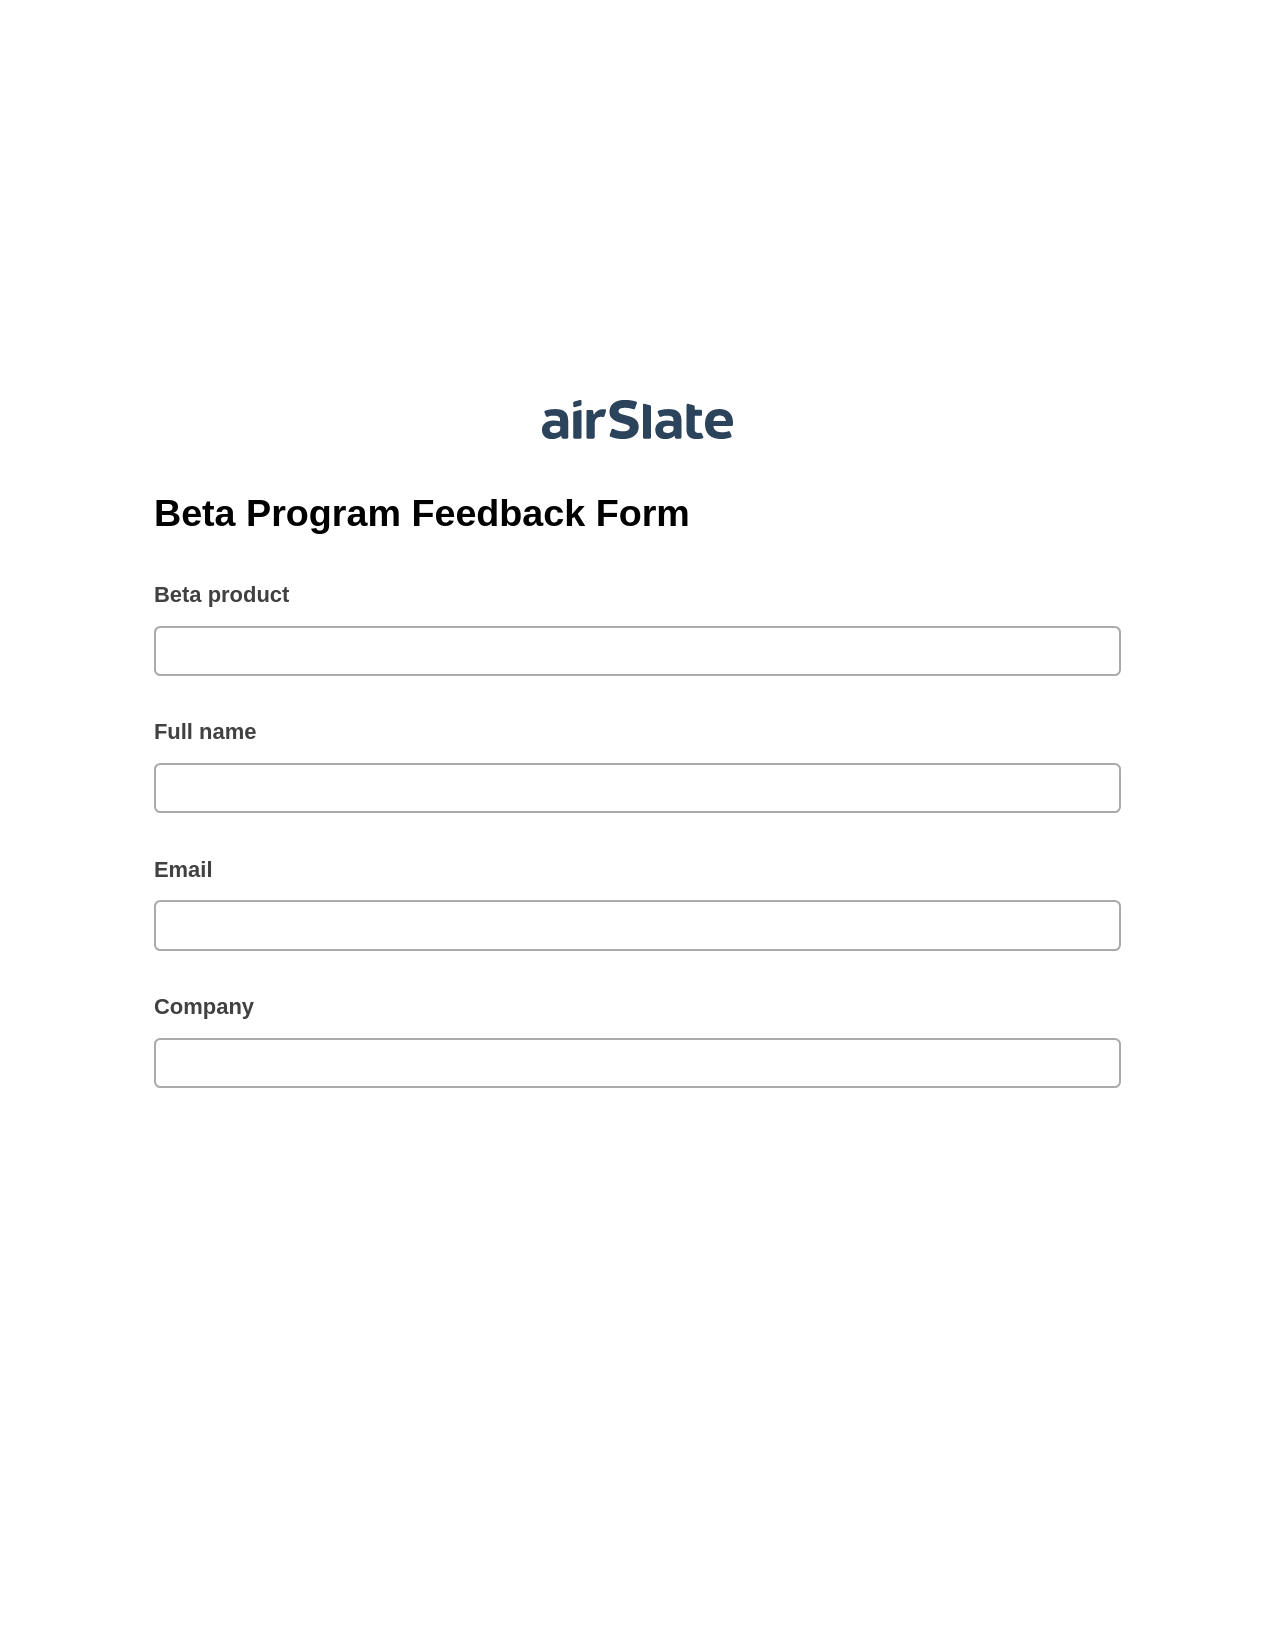 Beta Program Feedback Form Pre-fill from Google Sheets Bot, Send a Slate with Roles Bot, Post-finish Document Bot